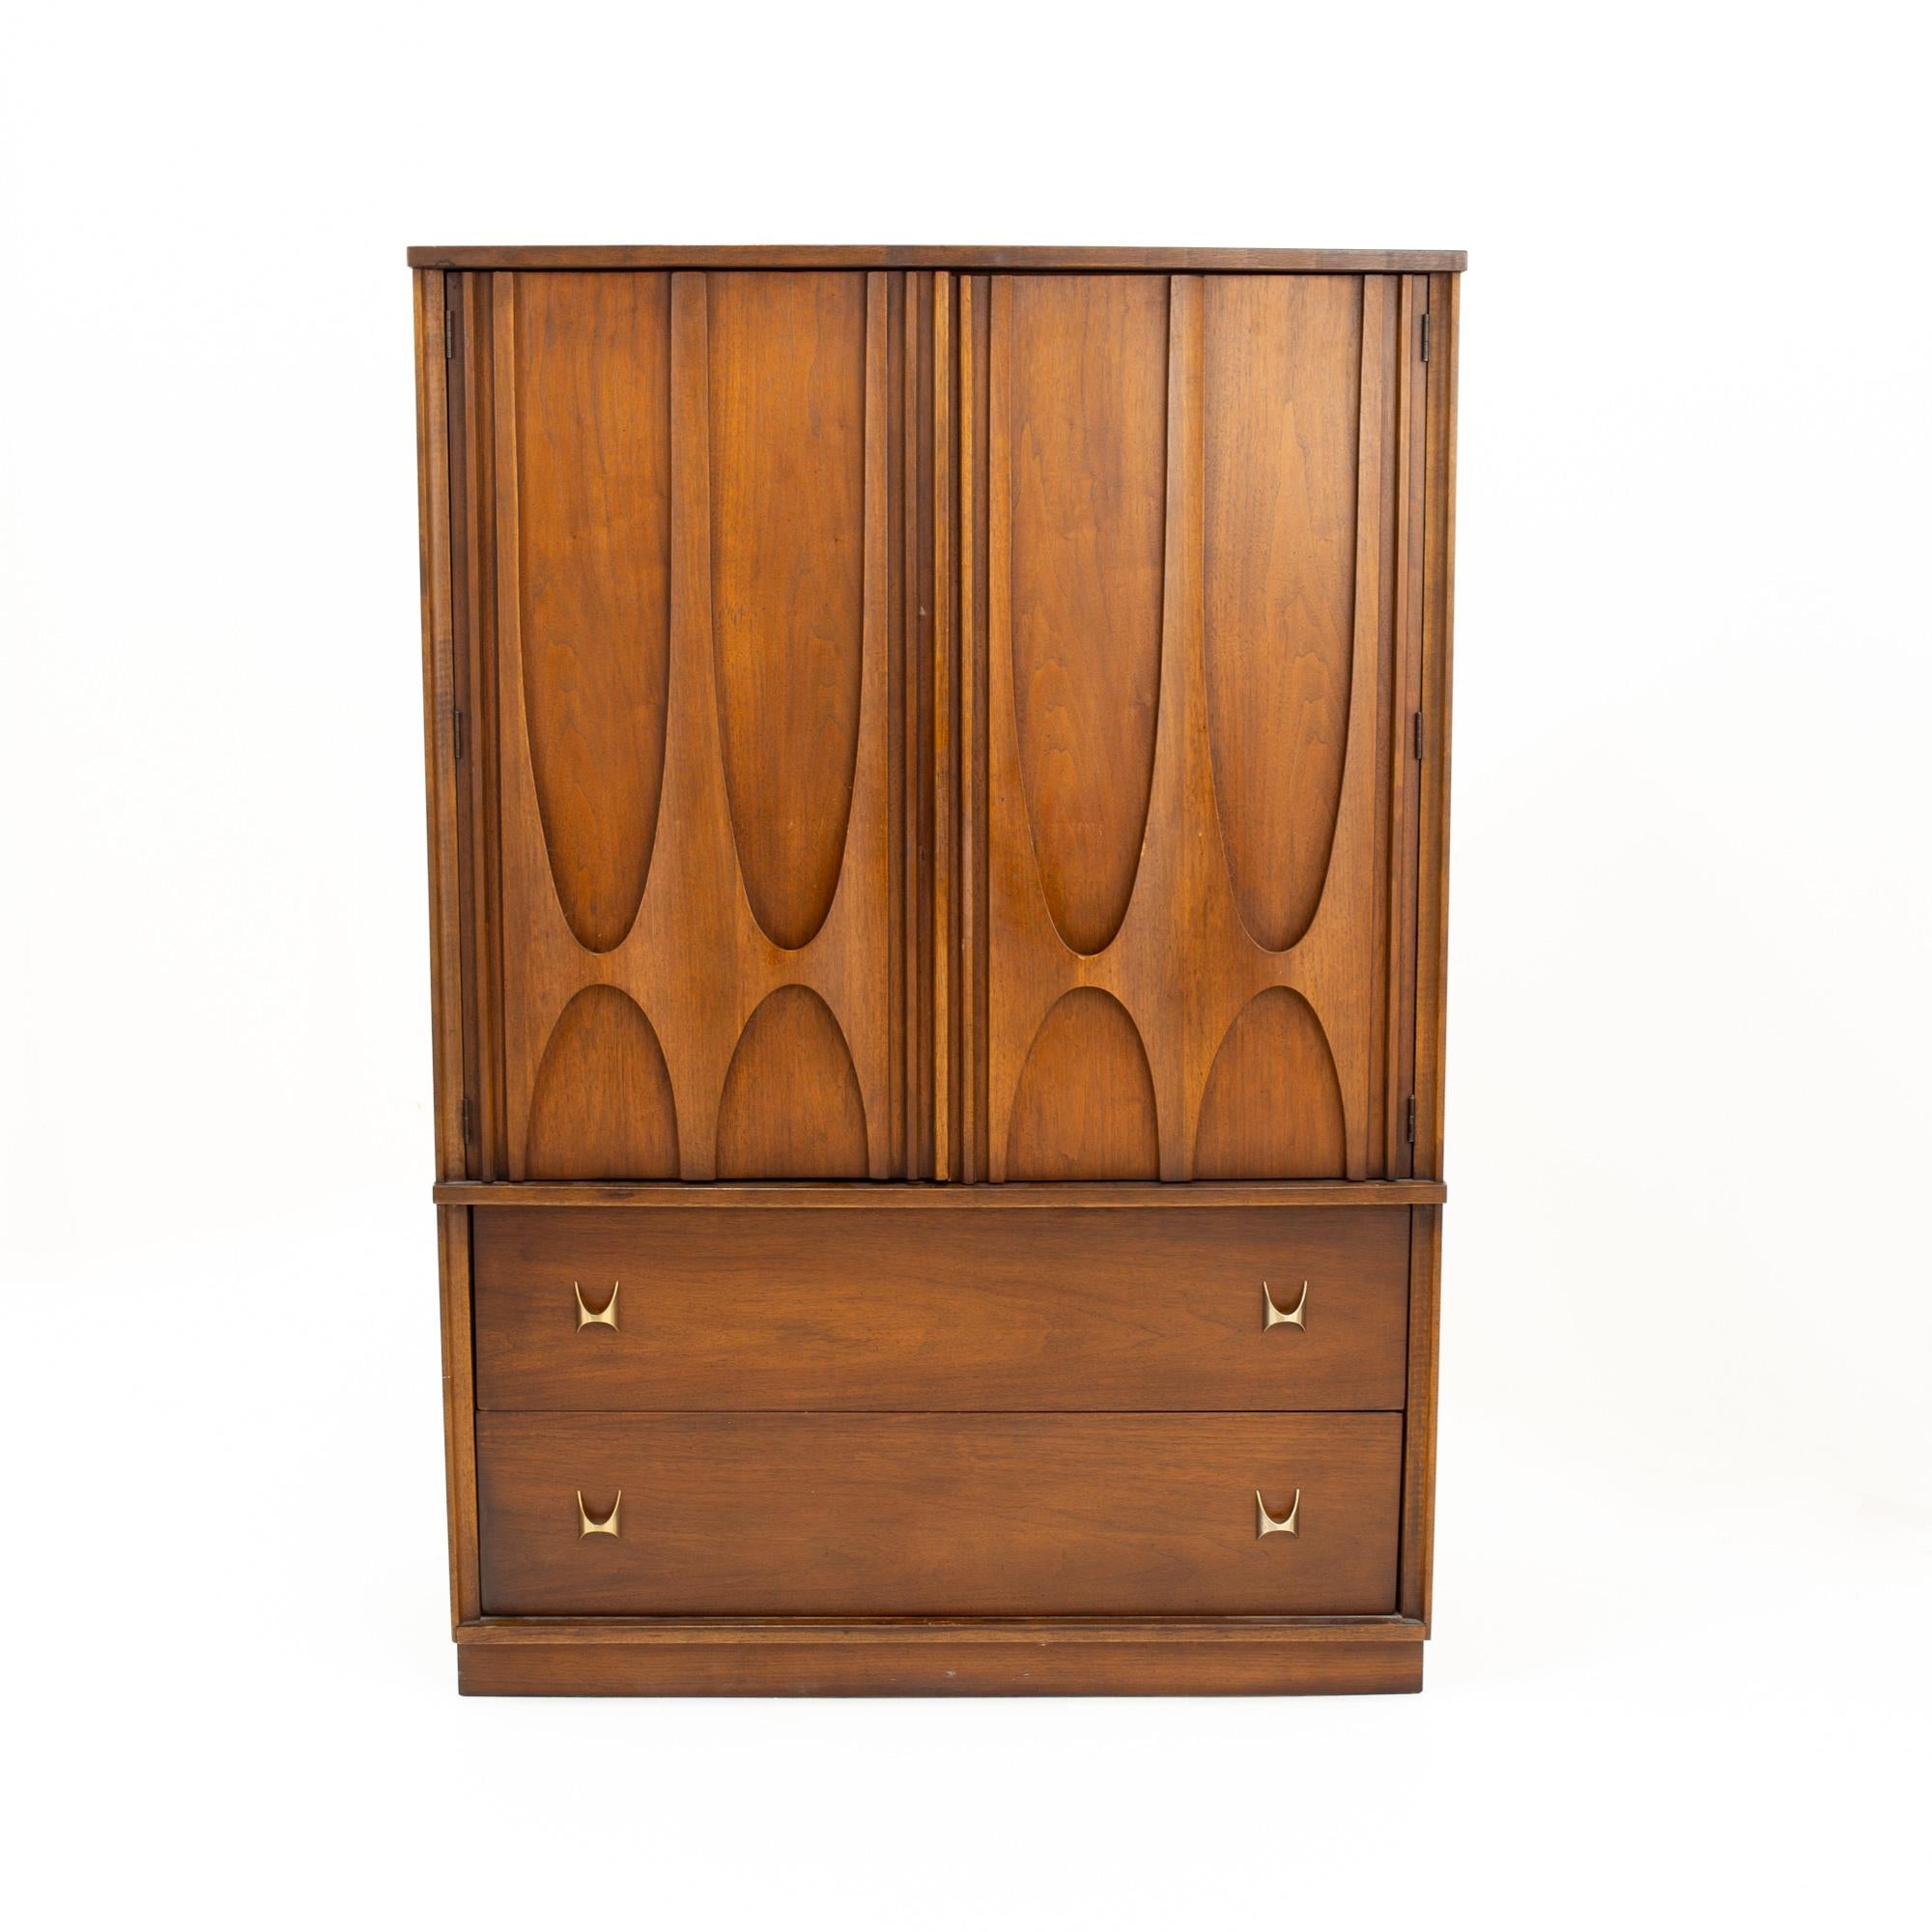 Broyhill Brasilia II Brutalist mid century walnut and brass armoire gentlemans chest

Chest measures: 40 wide x 19 deep x 58 inches high

All pieces of furniture can be had in what we call restored vintage condition. That means the piece is